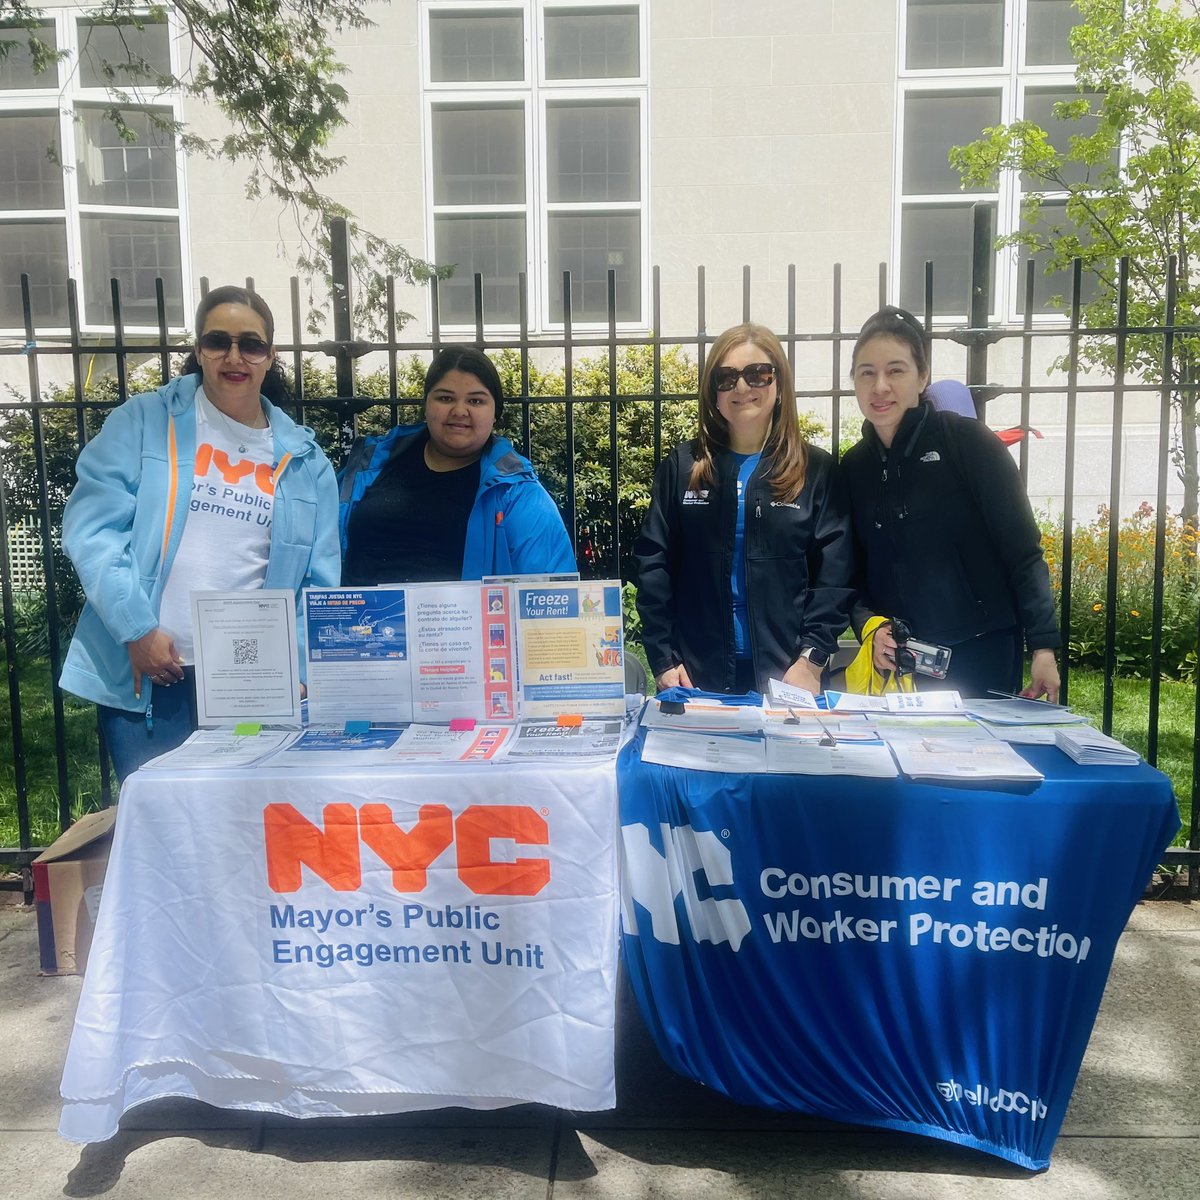 Thank you @QCHnyc for hosting today’s wonderful Community Health Fair! We connected New Yorkers to FREE City programs to help boost their financial health. Learn about #FairFares & #RentFreeze at nyc.gov/peu Book appt to #TalkMoney at nyc.gov/TalkMoney